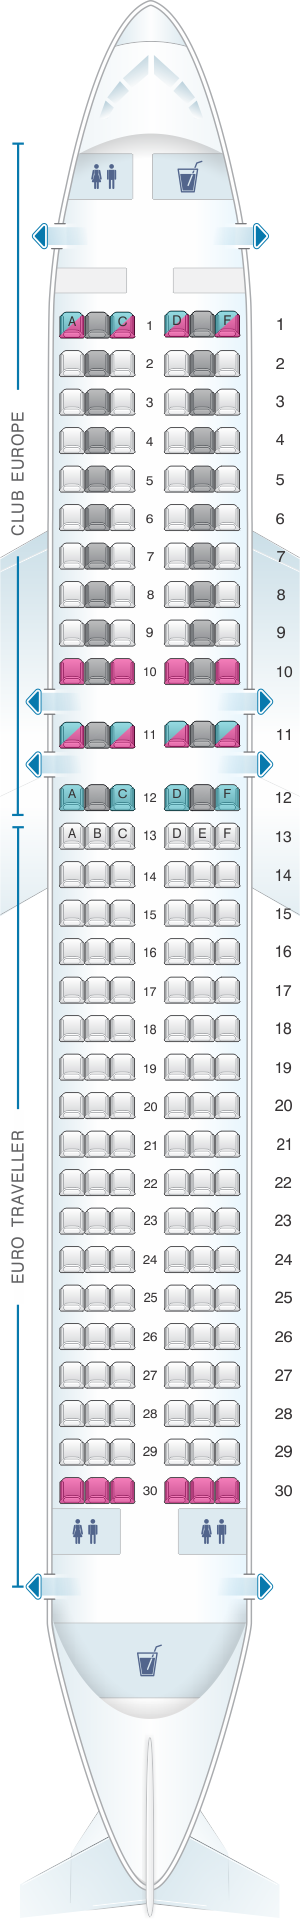 Seating Chart Airbus A320